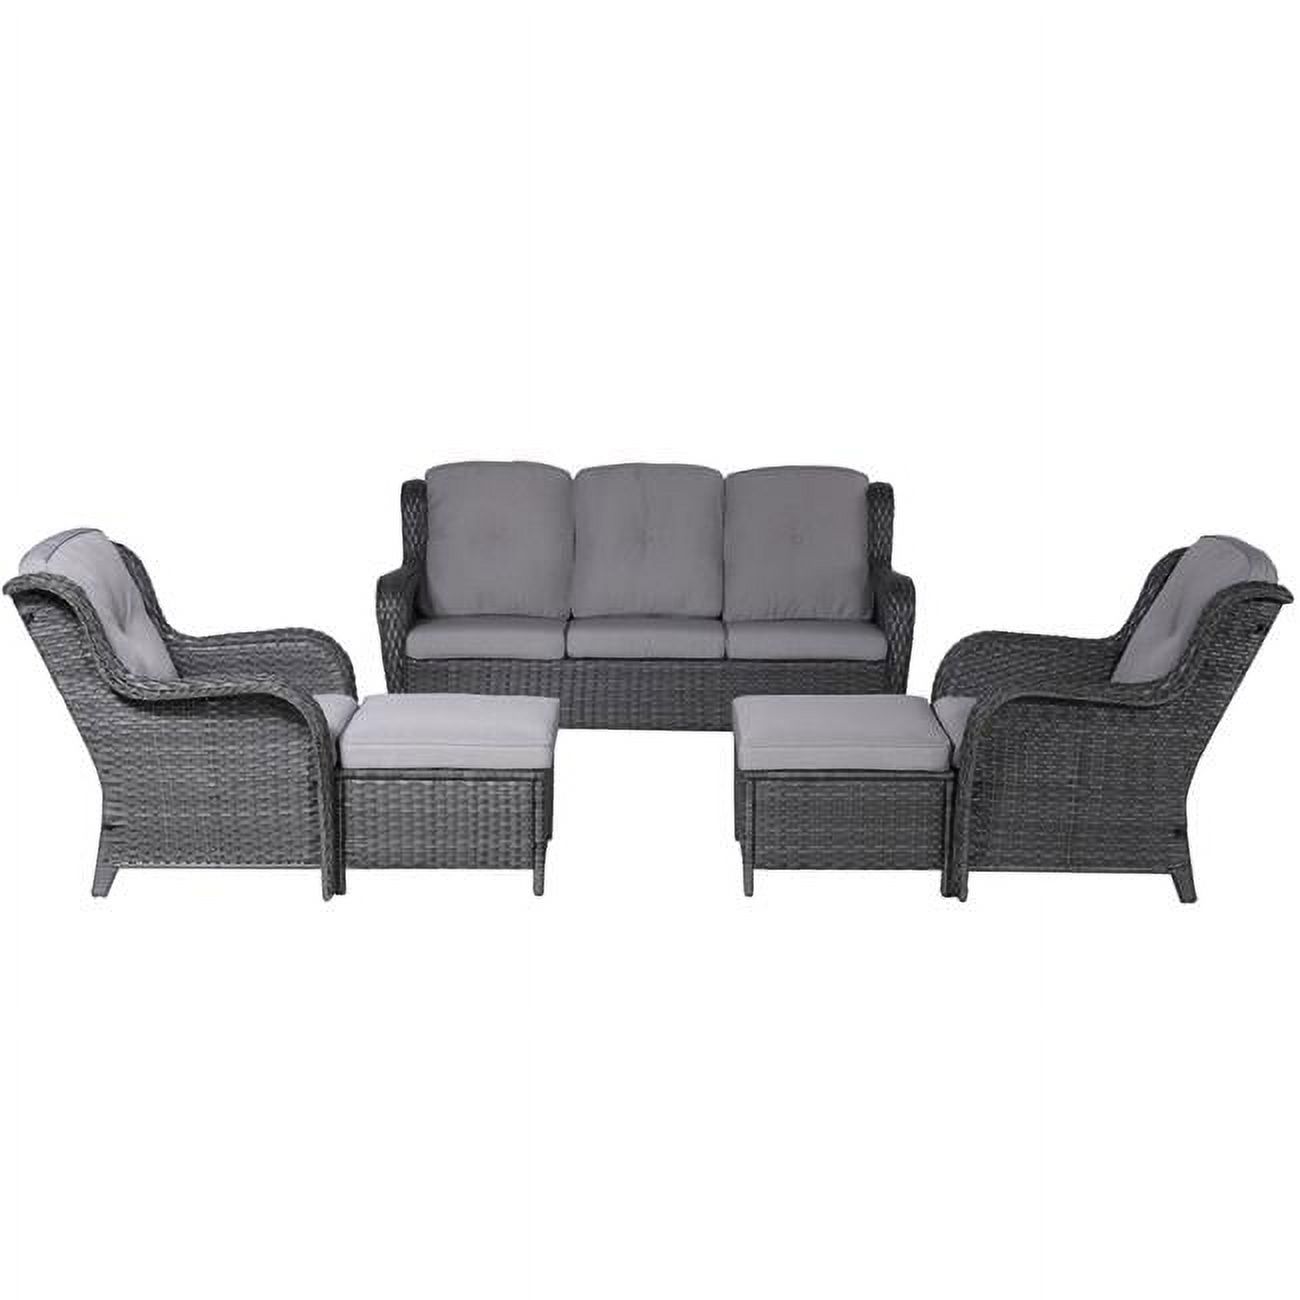 Direct Wicker PAS-2122-Gray Gray 5 Piece Wicker Patio Garden Furniture Conversation Seating Sofa Set with Cushions and Ottoman - image 1 of 1